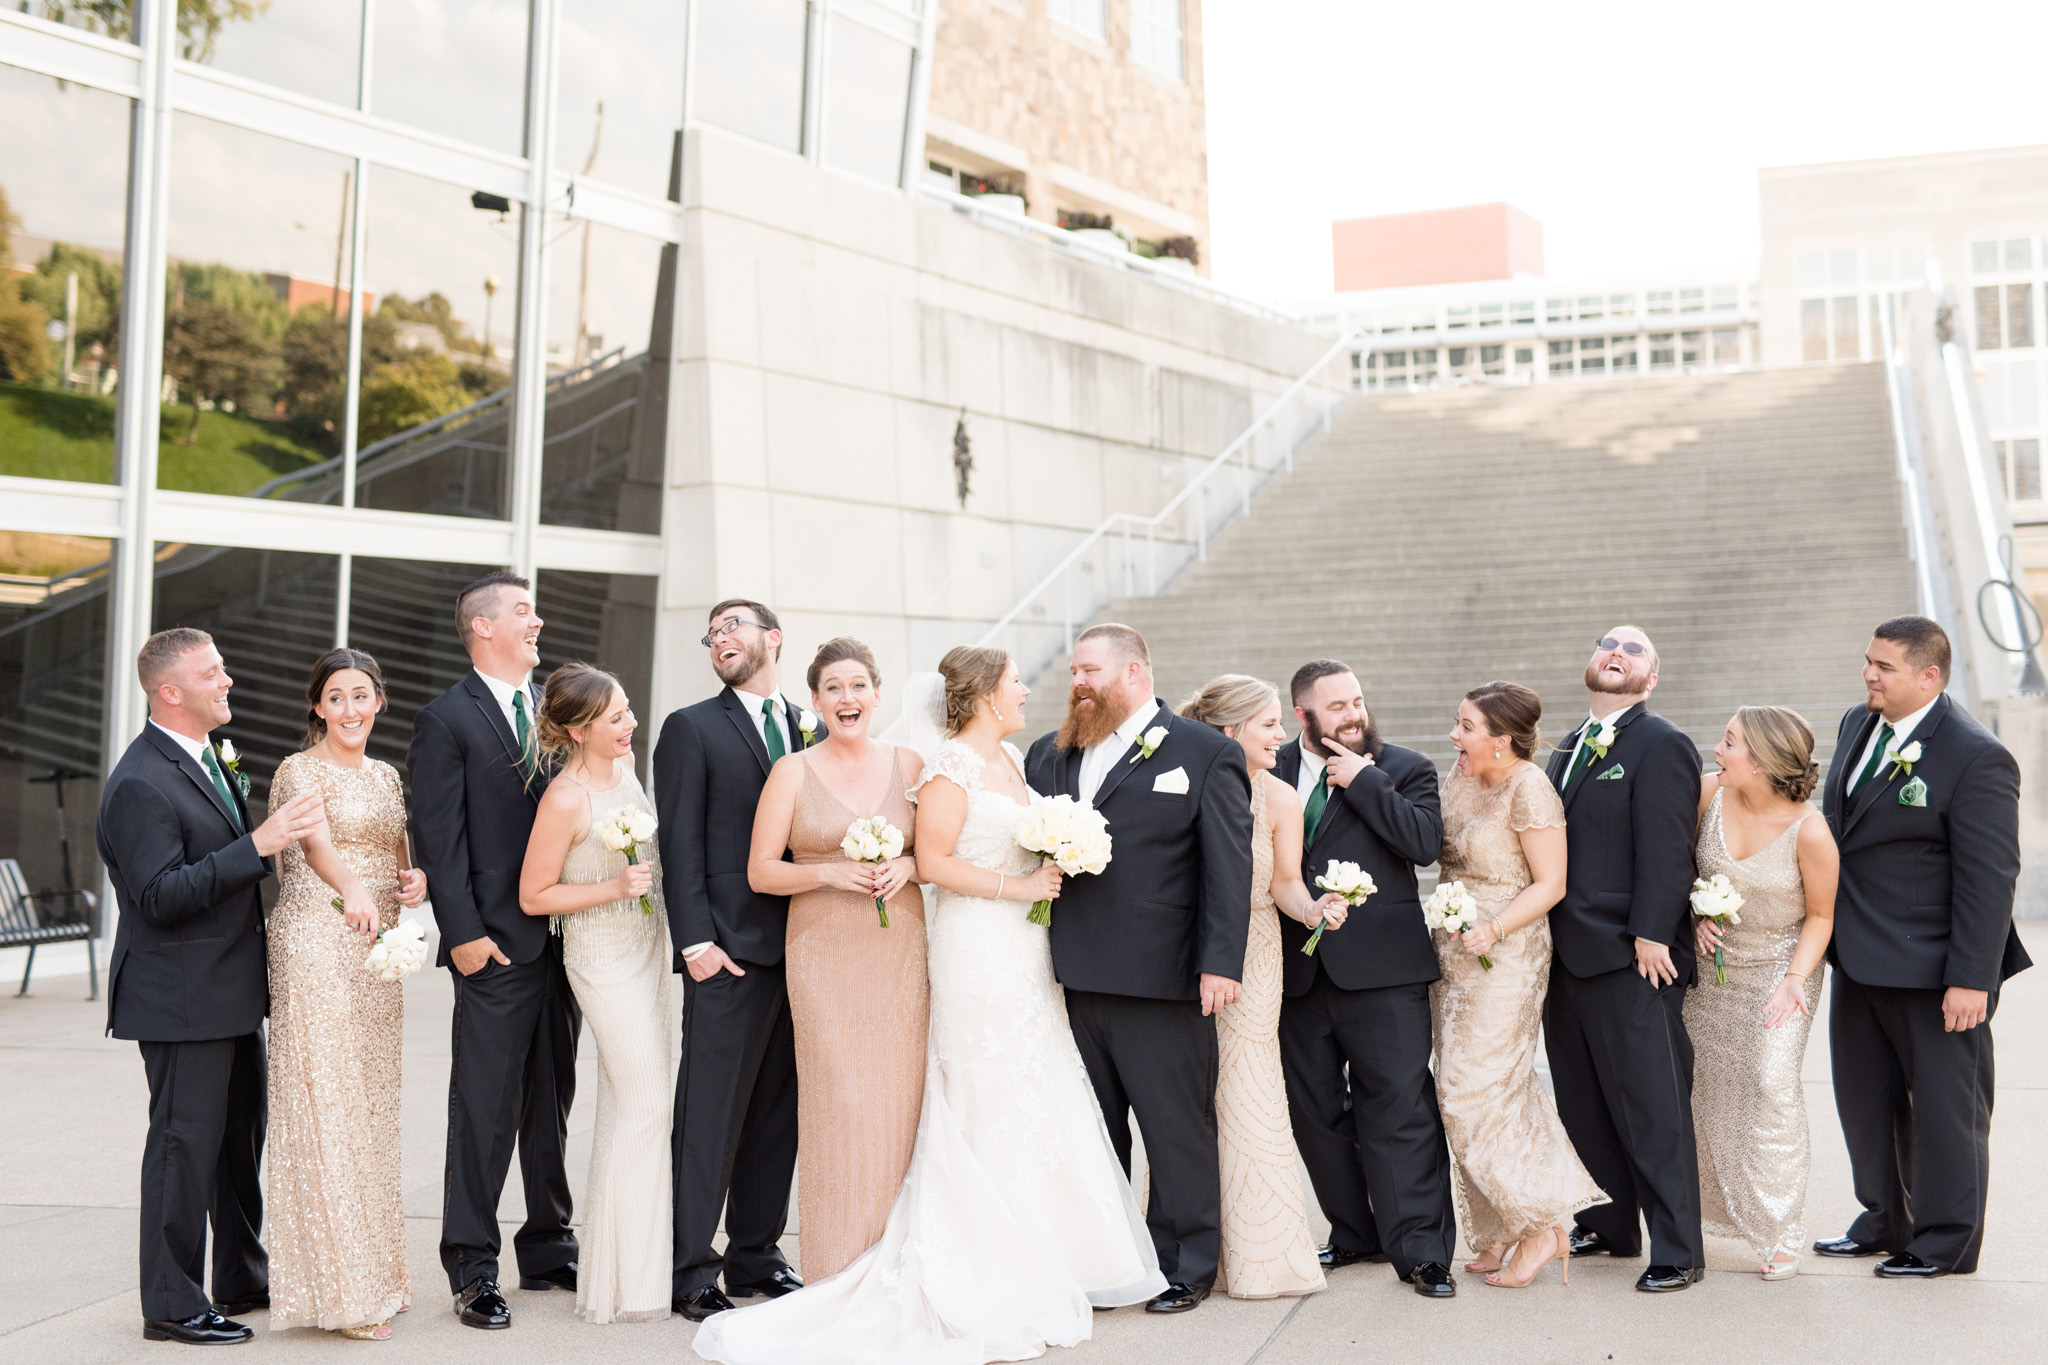 Wedding party laughs together in downtown Indianapolis.